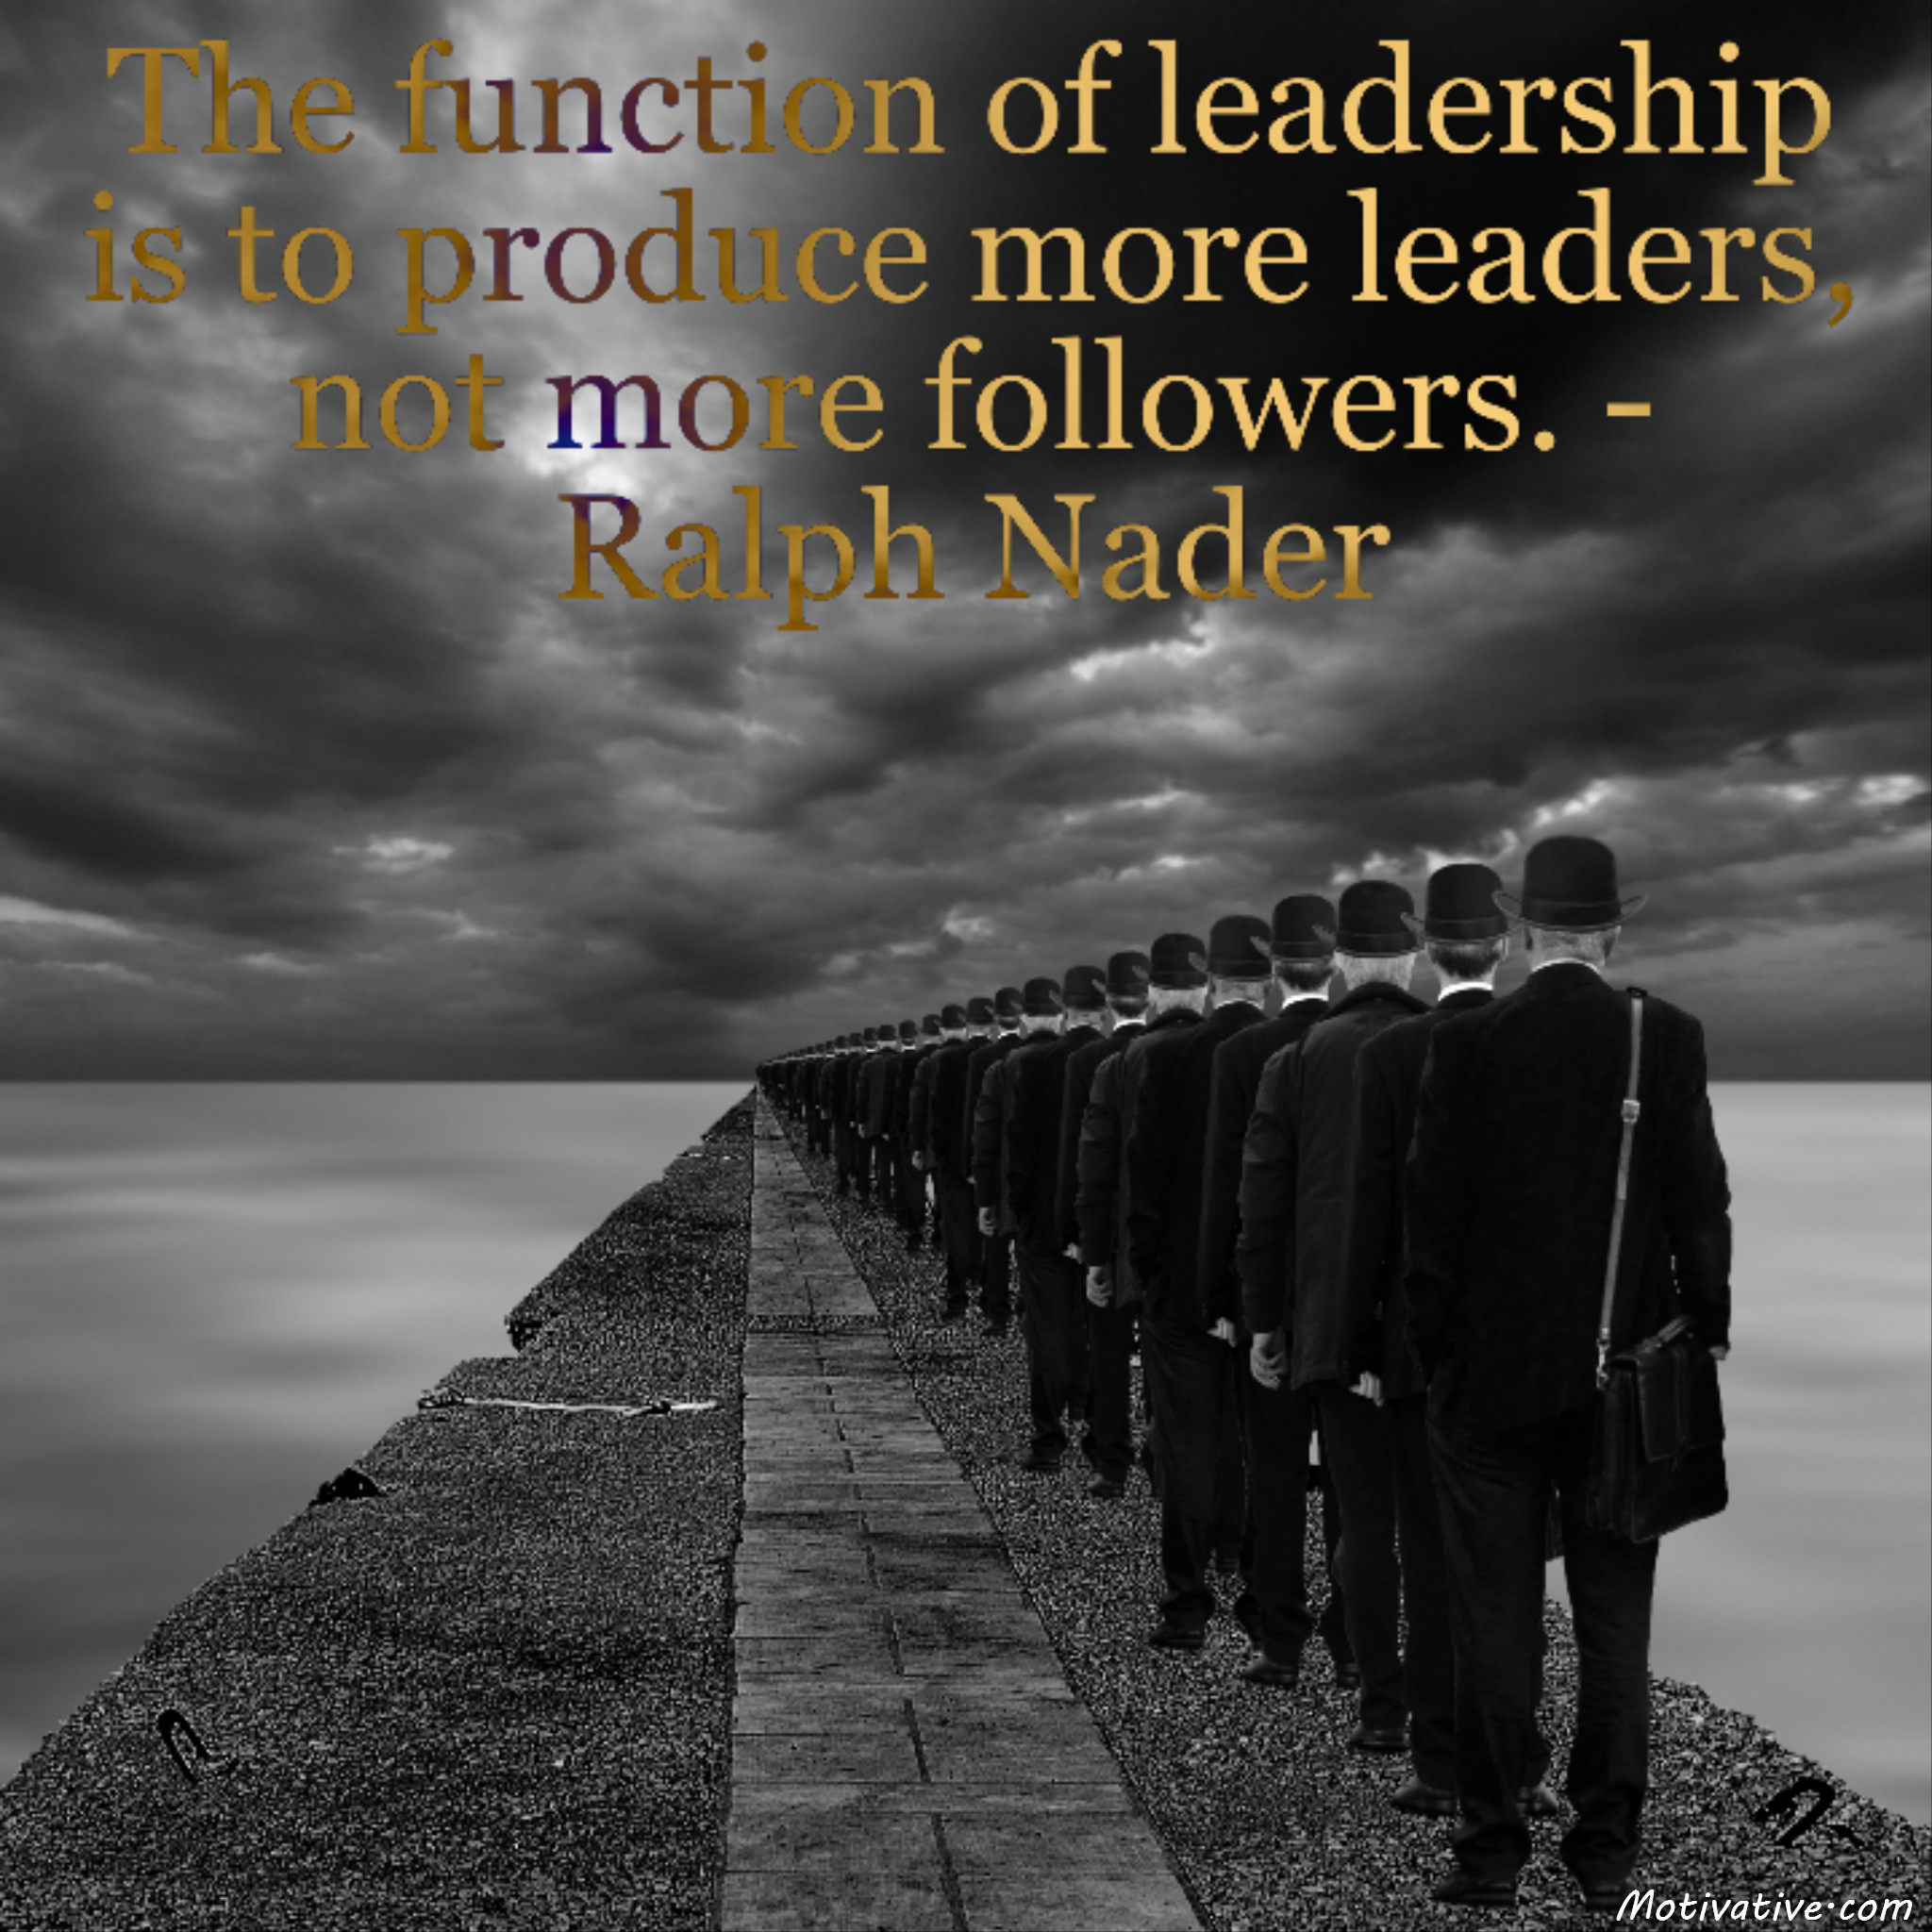 The function of leadership is to produce more leaders, not more followers. – Ralph Nader